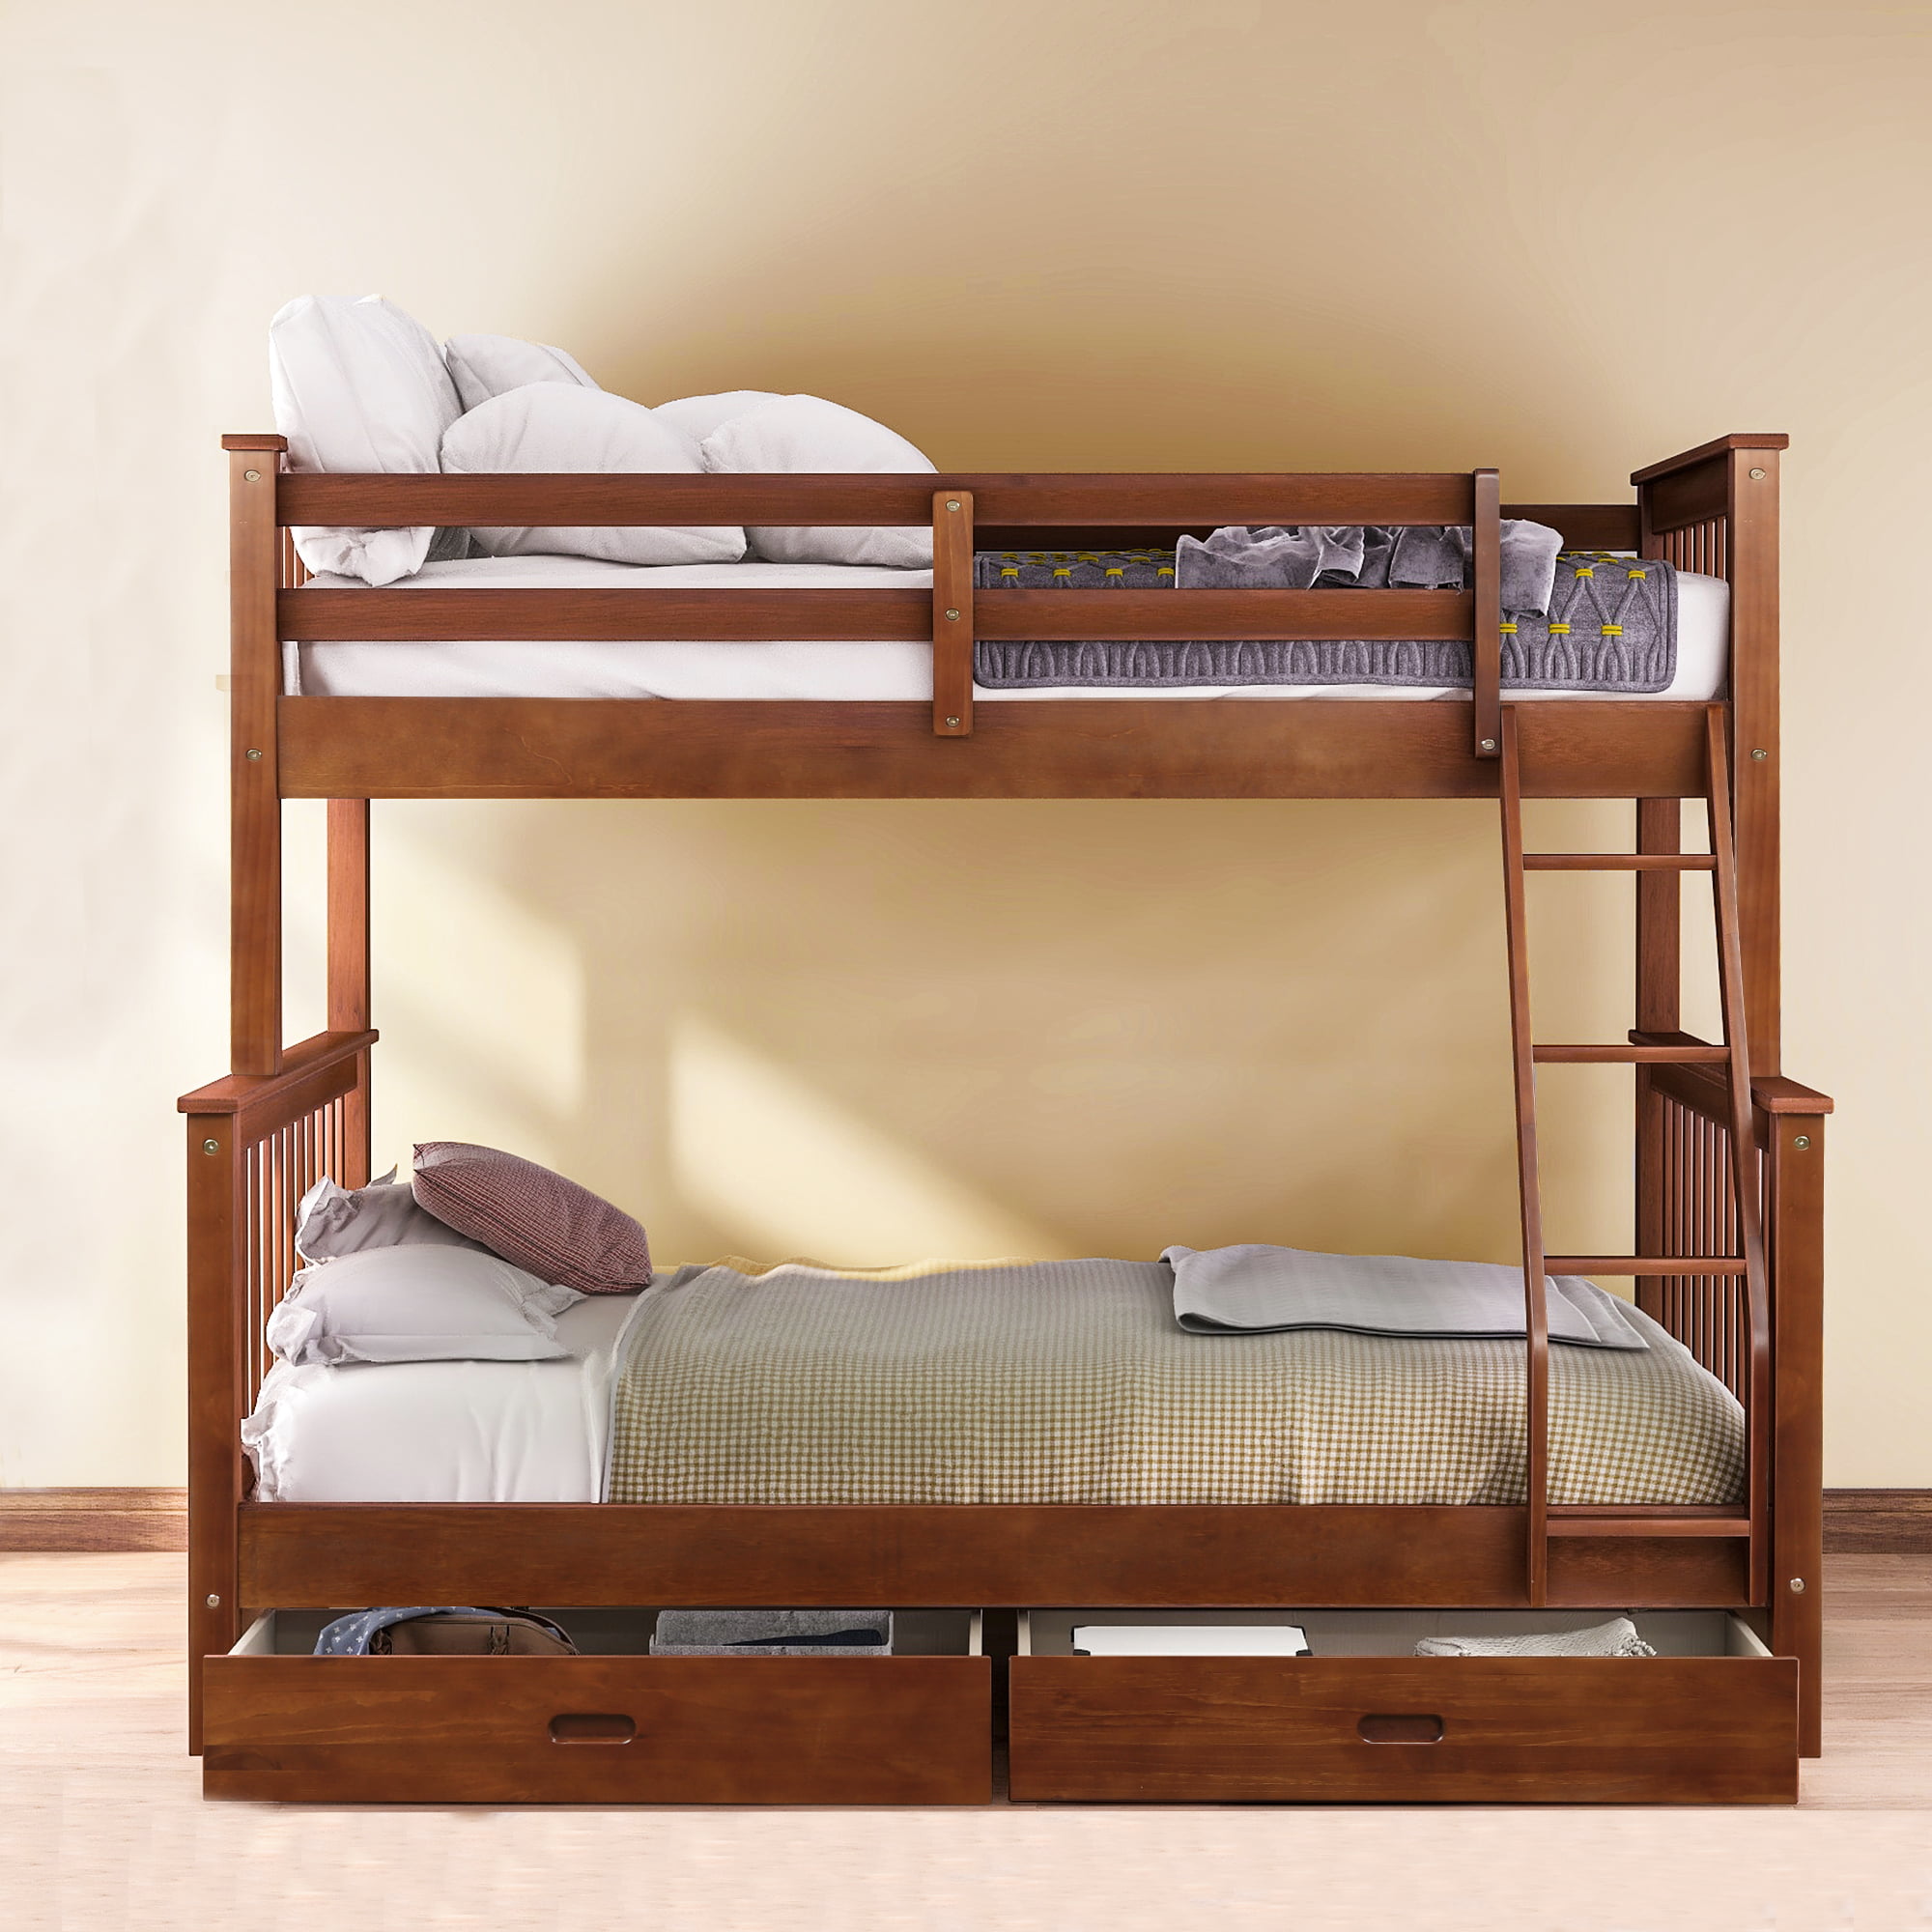 twin bed for boy